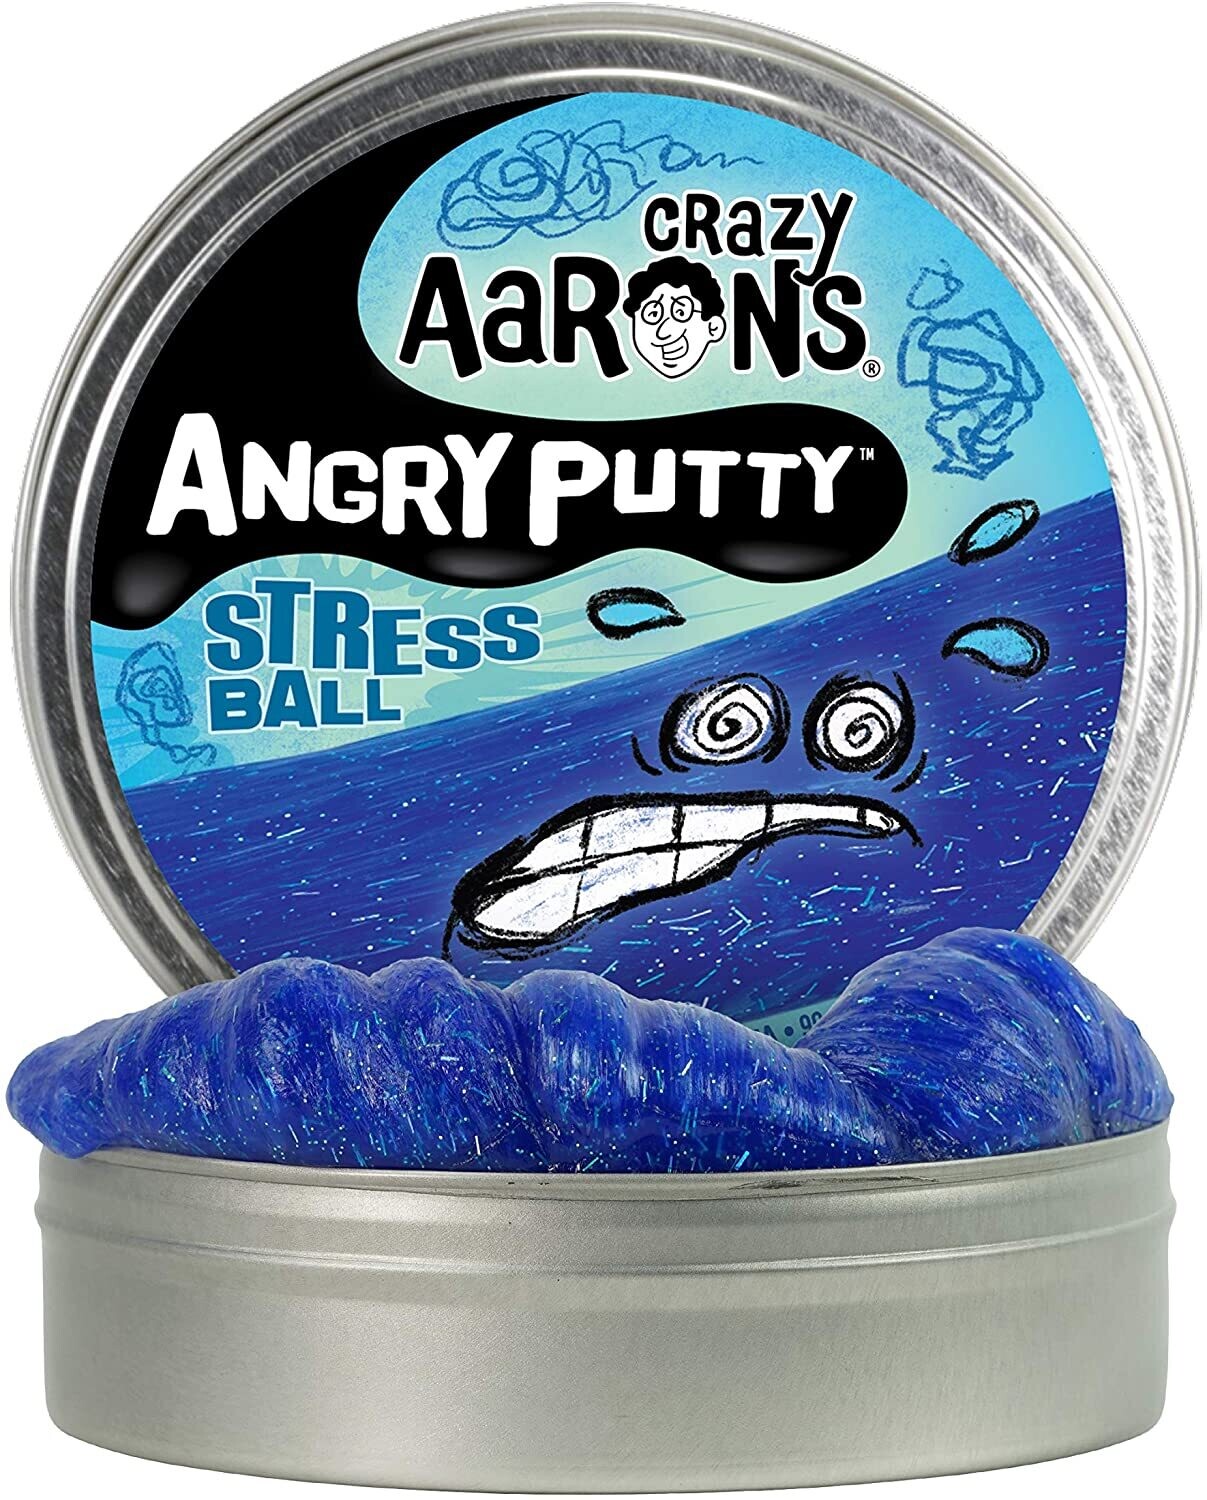 Crazy Aaron's Thinking Putty Angry Putty Stress Ball